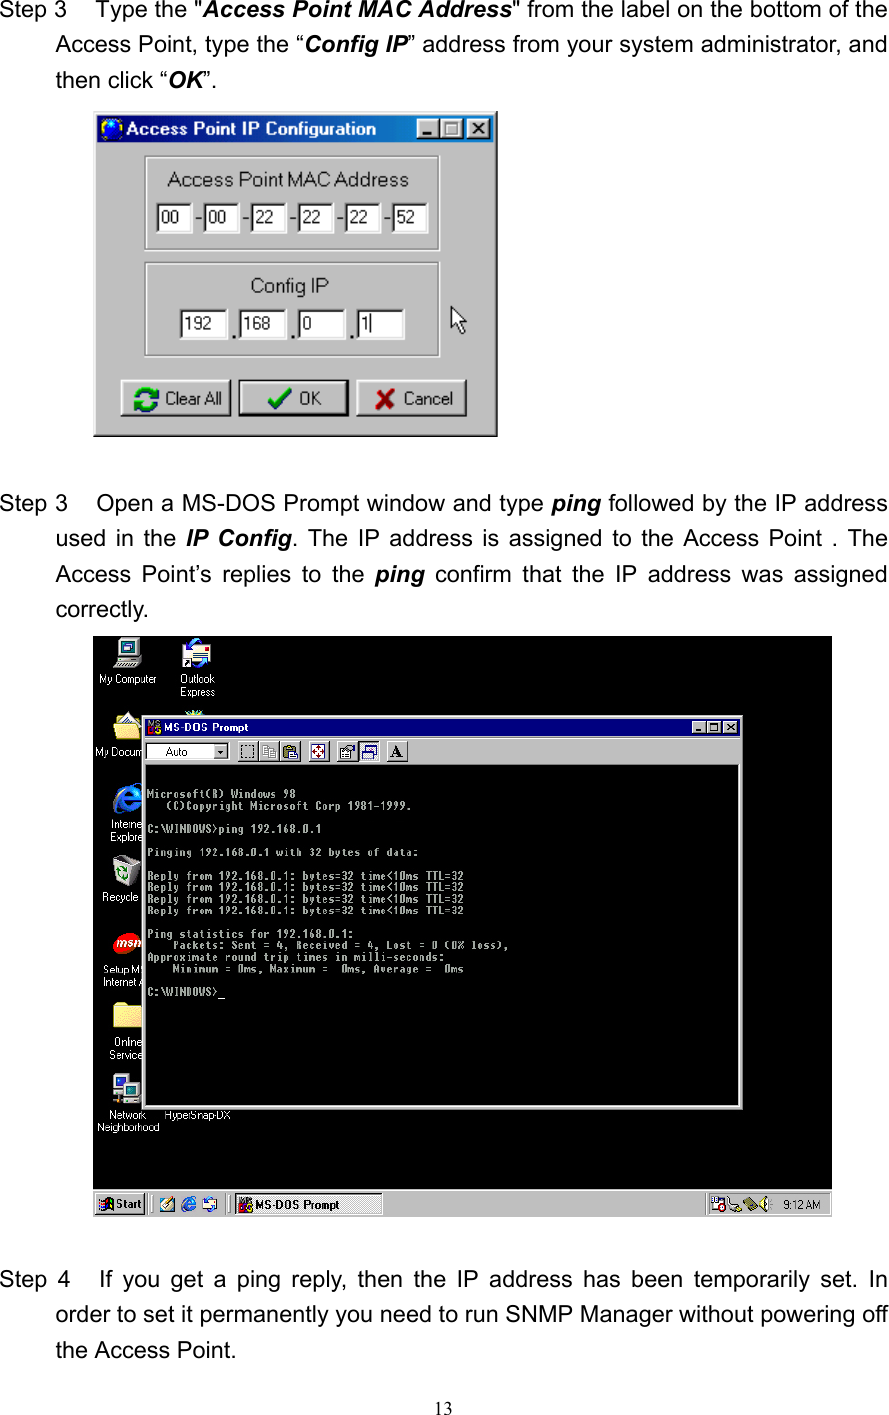   13  Step 3    Type the &quot;Access Point MAC Address&quot; from the label on the bottom of the Access Point, type the “Config IP” address from your system administrator, and then click “OK”.   Step 3    Open a MS-DOS Prompt window and type ping followed by the IP address used in the IP Config. The IP address is assigned to the Access Point . The Access Point’s replies to the ping  confirm that the IP address was assigned correctly.   Step 4    If you get a ping reply, then the IP address has been temporarily set. In order to set it permanently you need to run SNMP Manager without powering off the Access Point. 